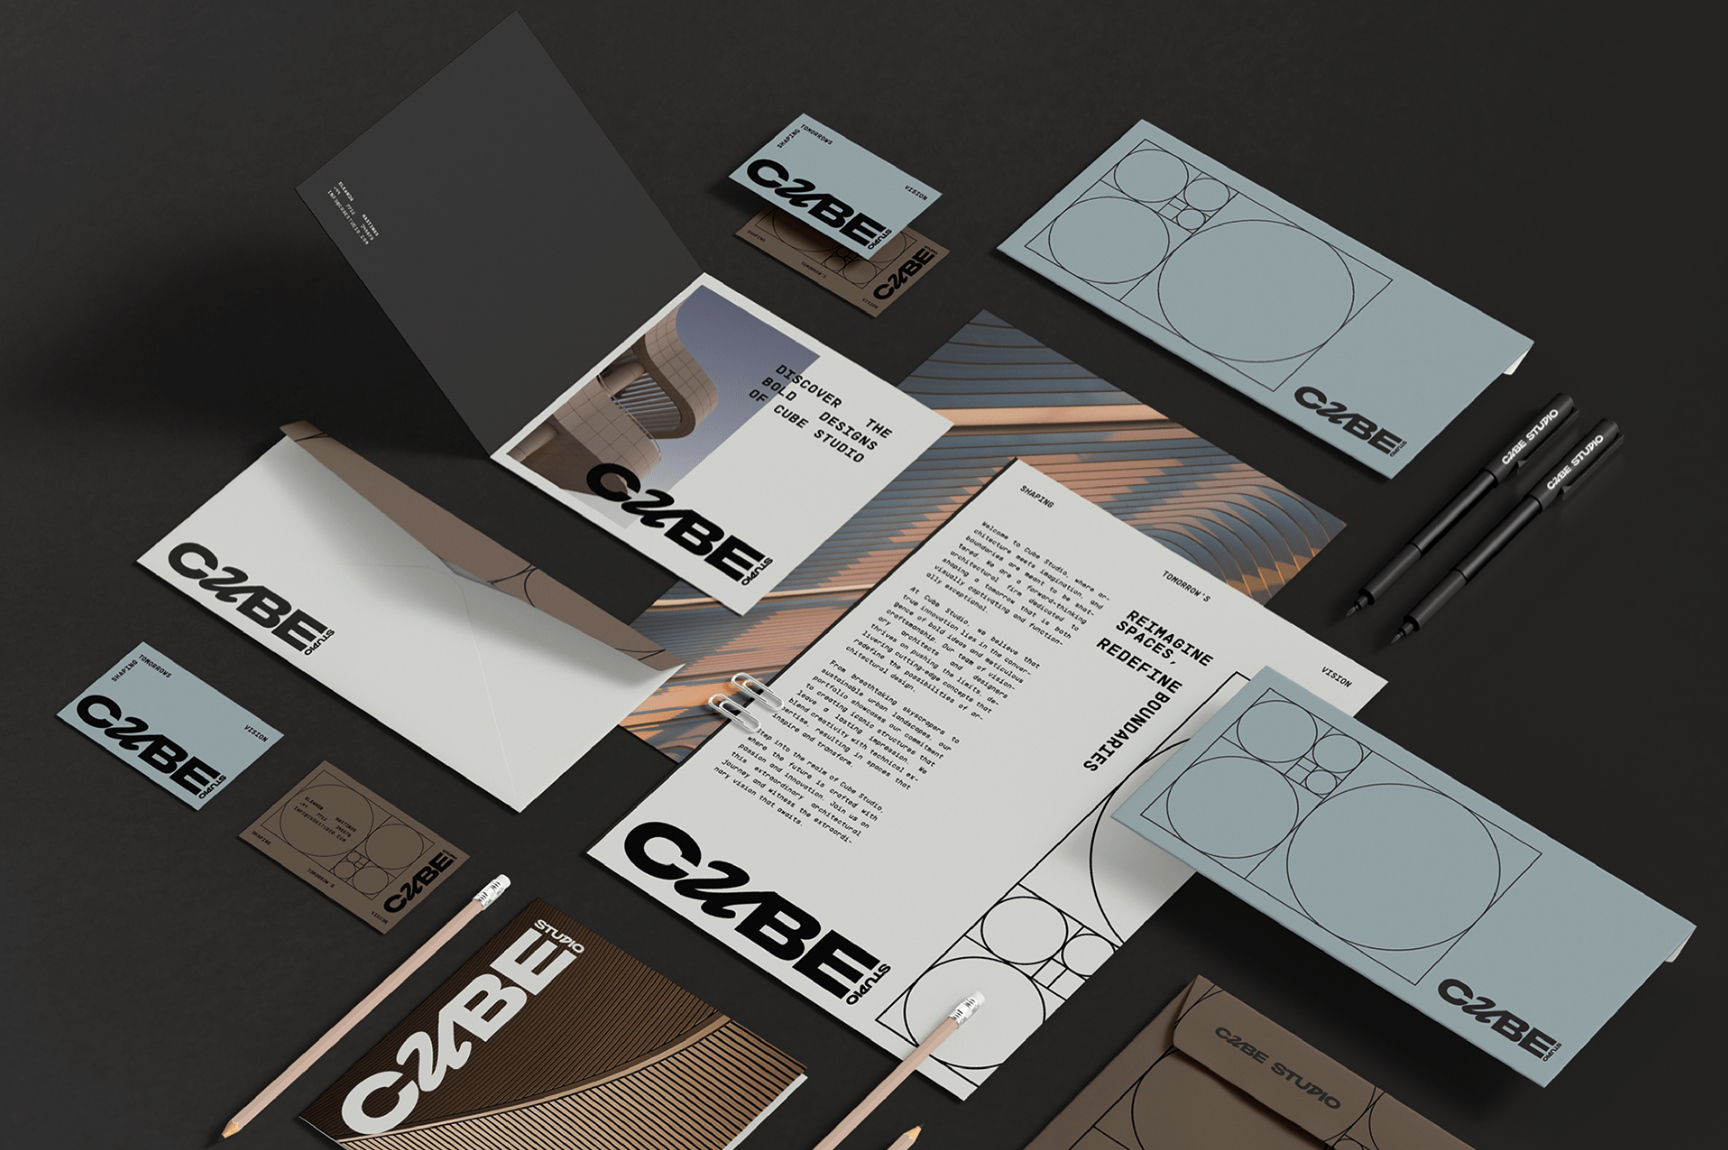 identity design featuring visible grid lines graphic design trend